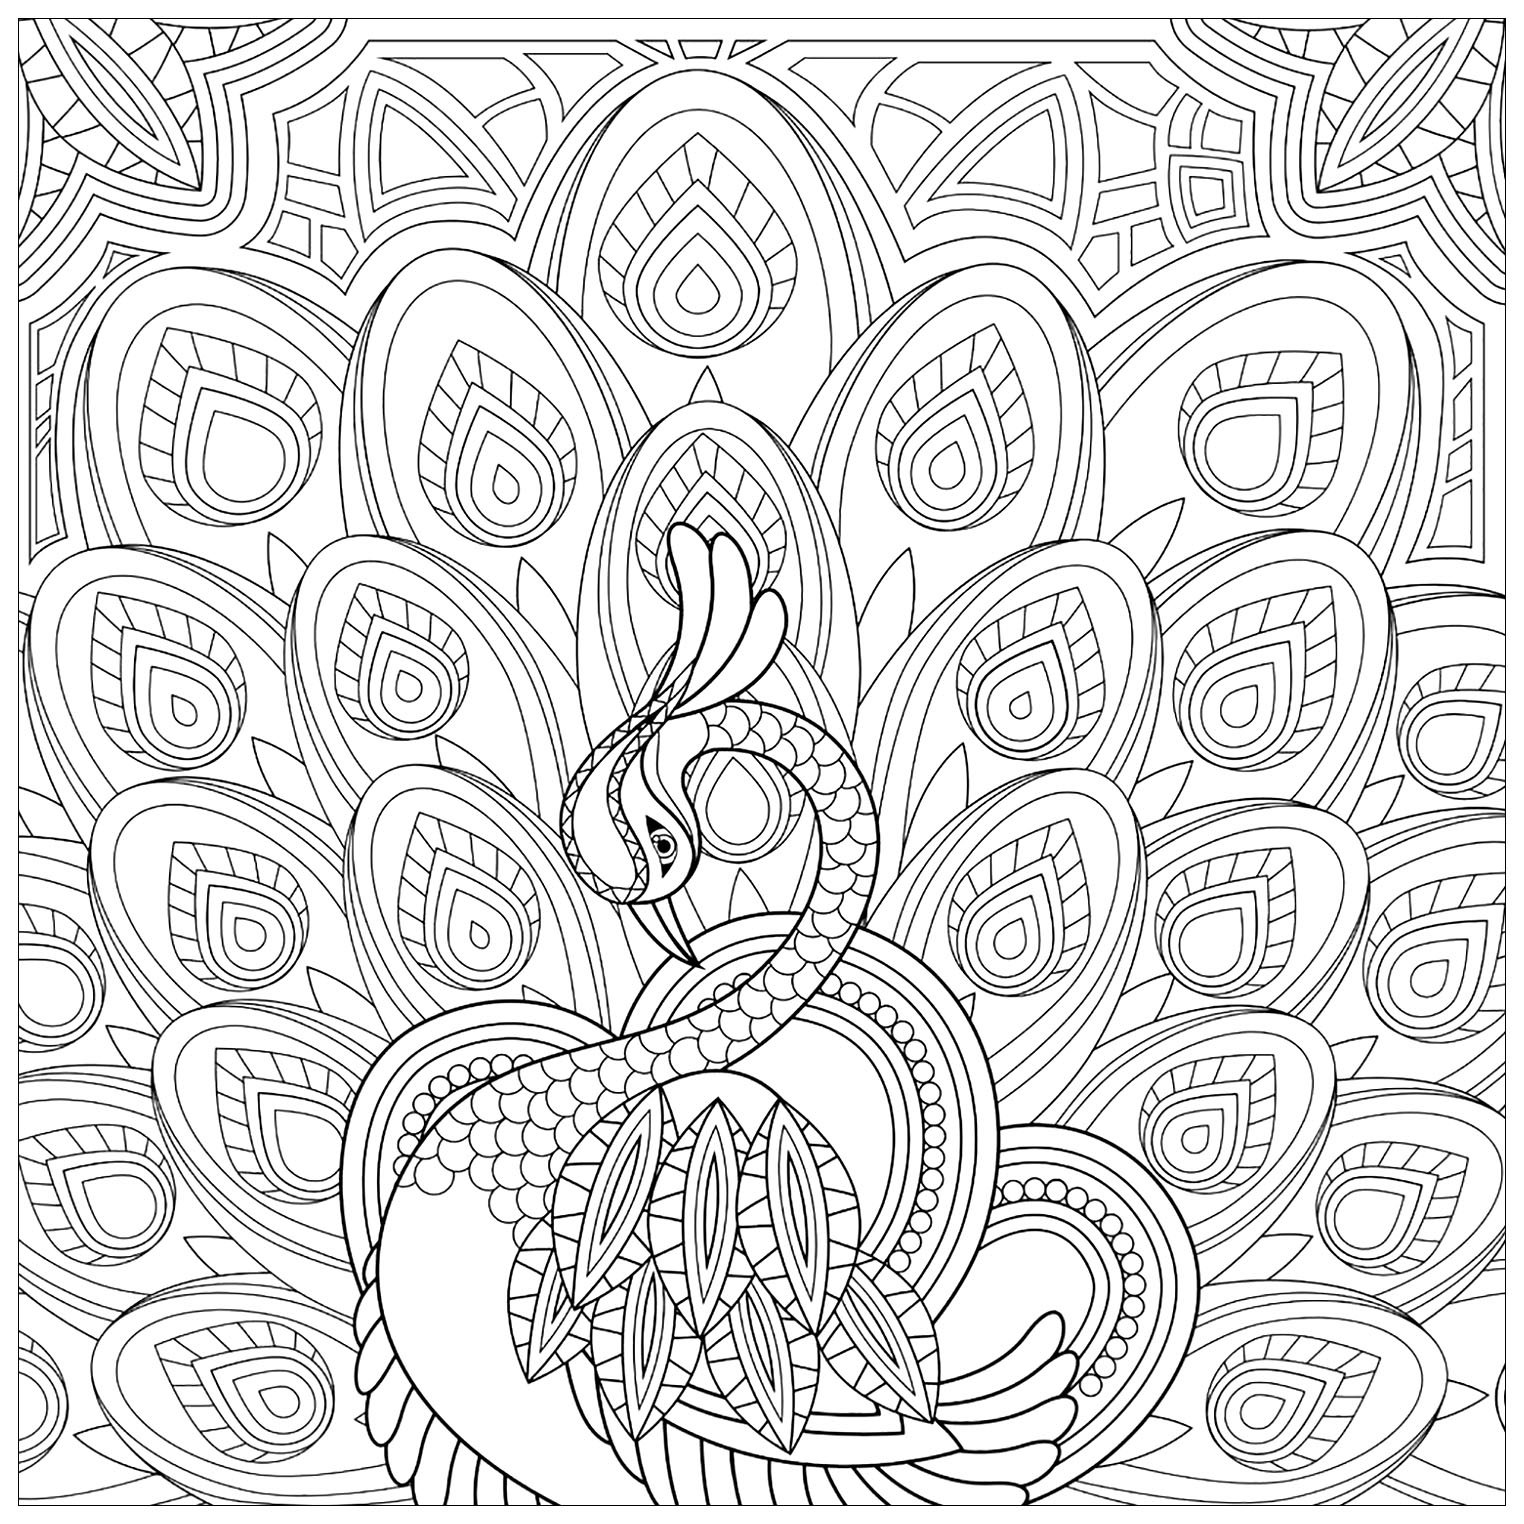 Coloring Pages : Peacocks Free To Color For Children Kids Coloring  Printable Zodiac Signs Lines And Angles Worksheet Decimal Arithmetic My  Math Website Giant Graph Paper Sums Year Olds Worksheets. Free Printable